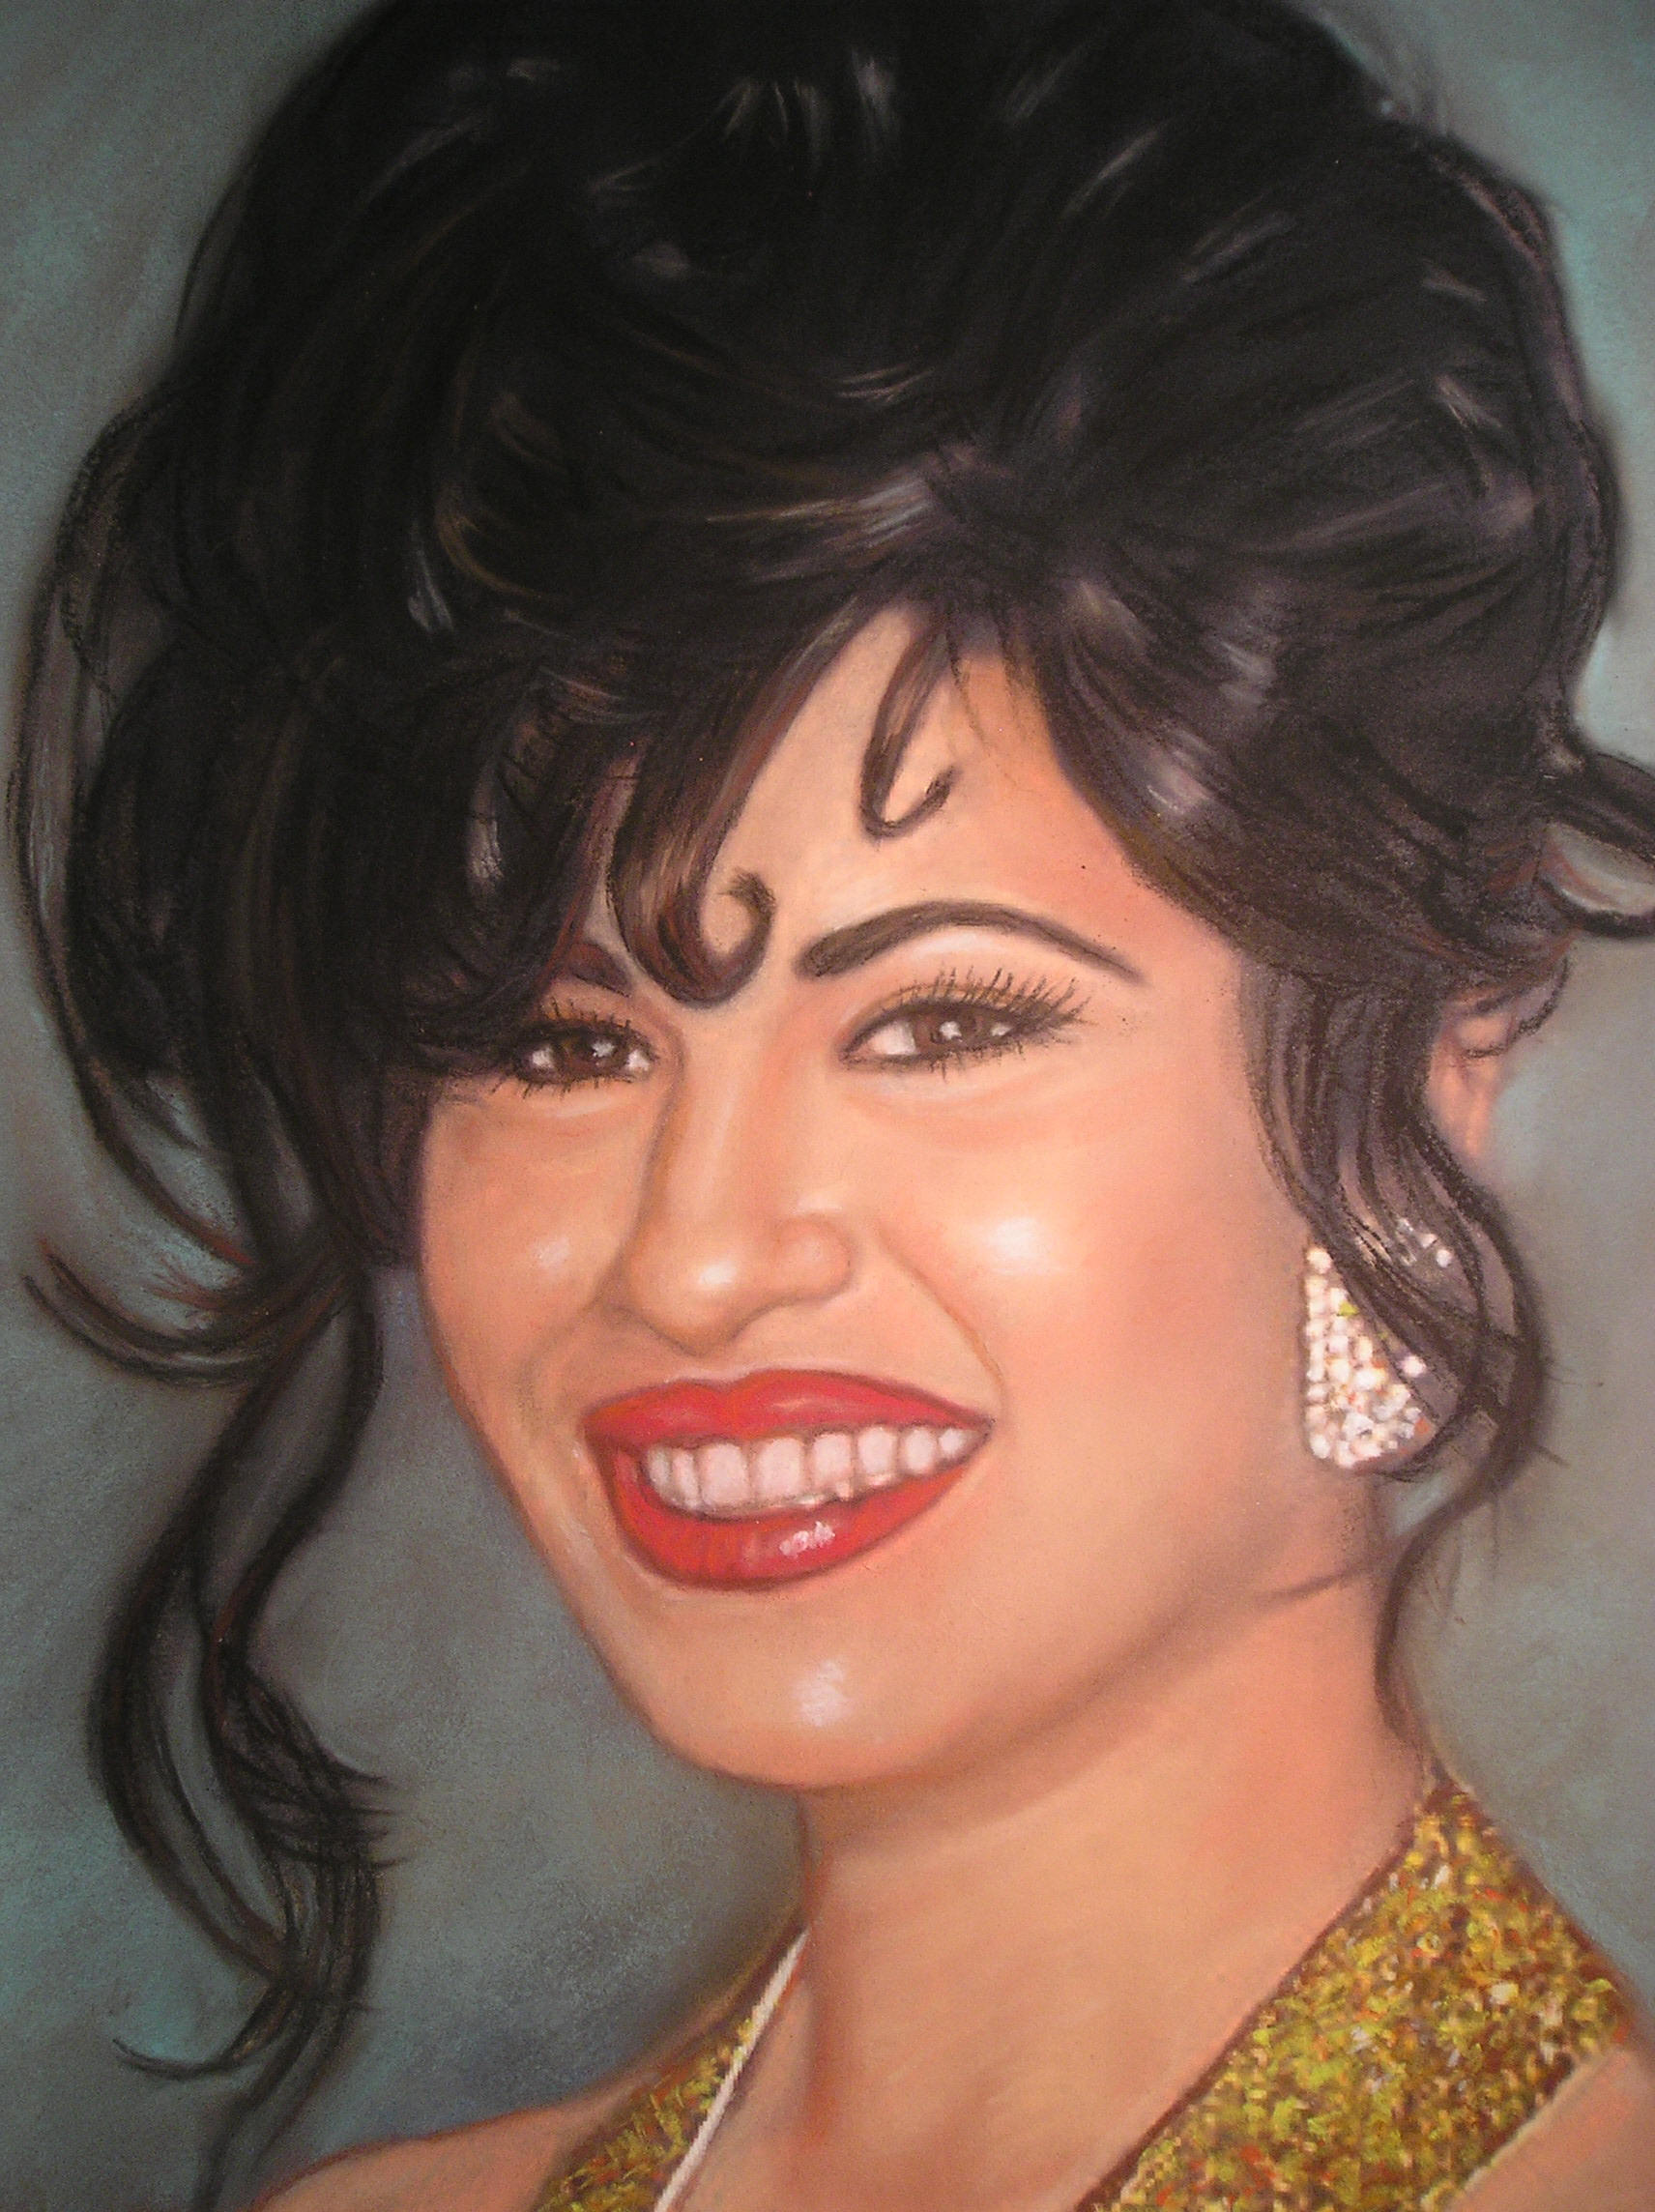 Artists pay tribute to SELENA